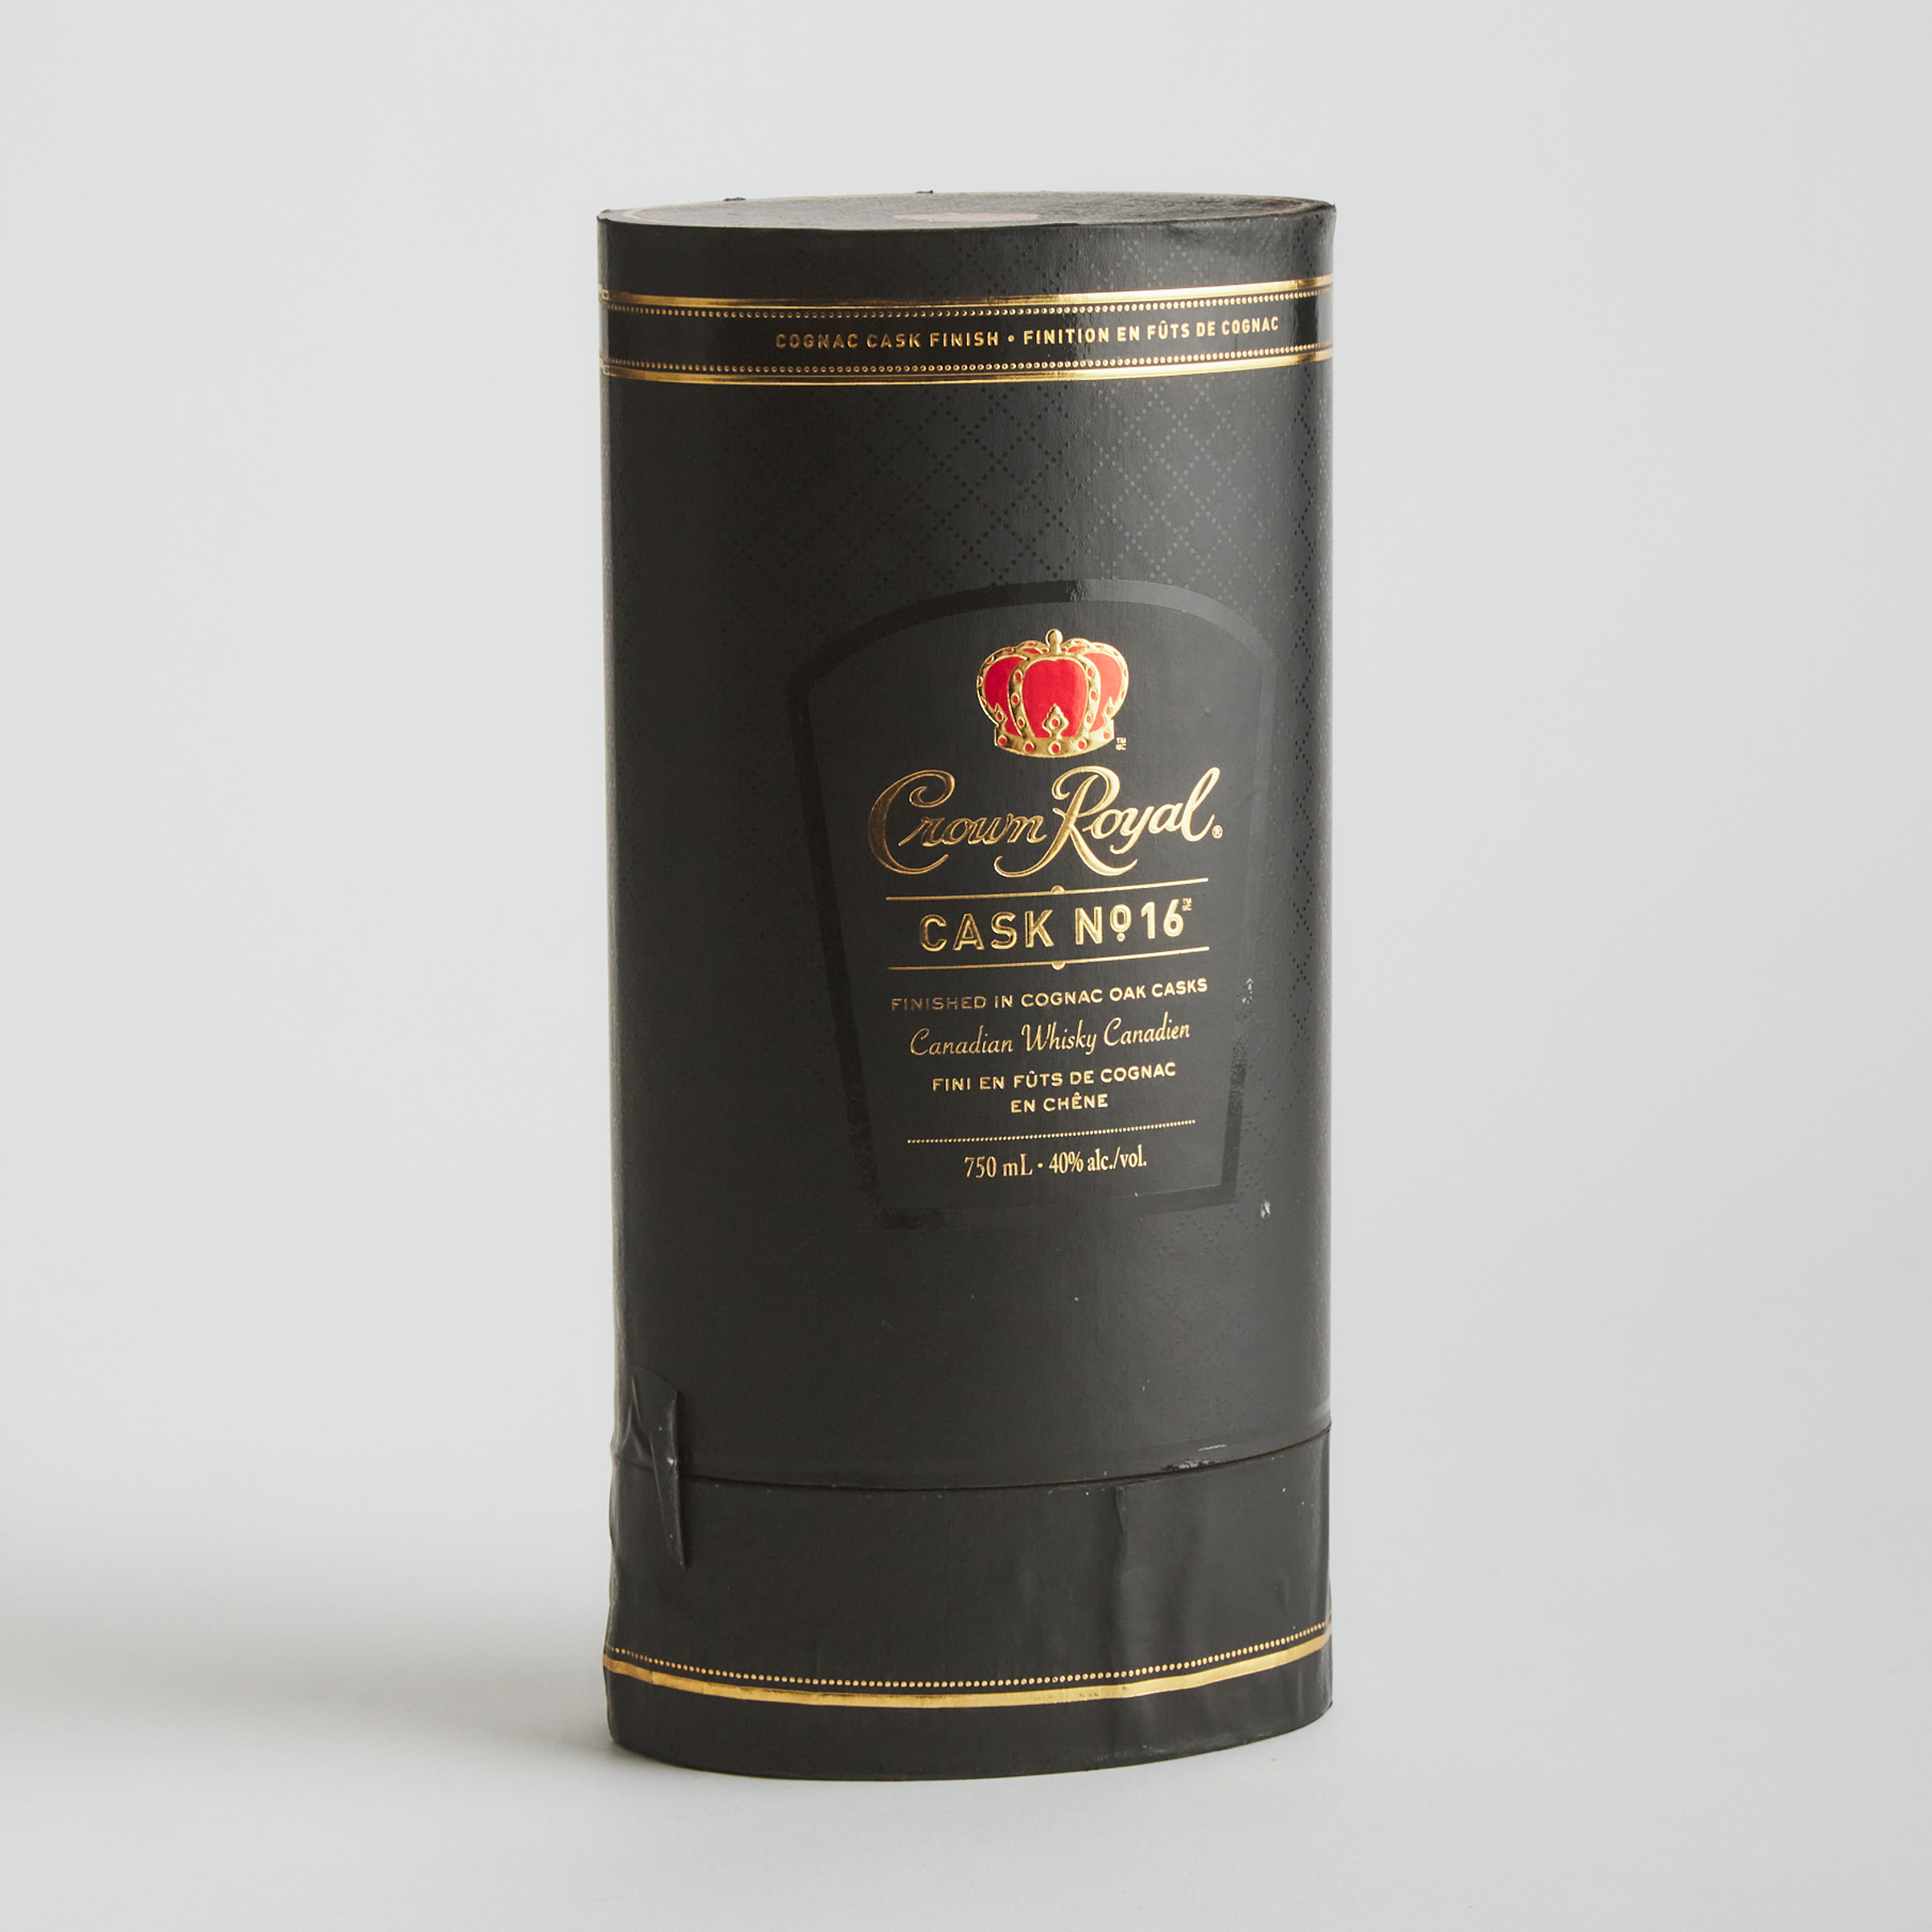 CROWN ROYAL CANADIAN WHISKY NAS (ONE 750 ML)